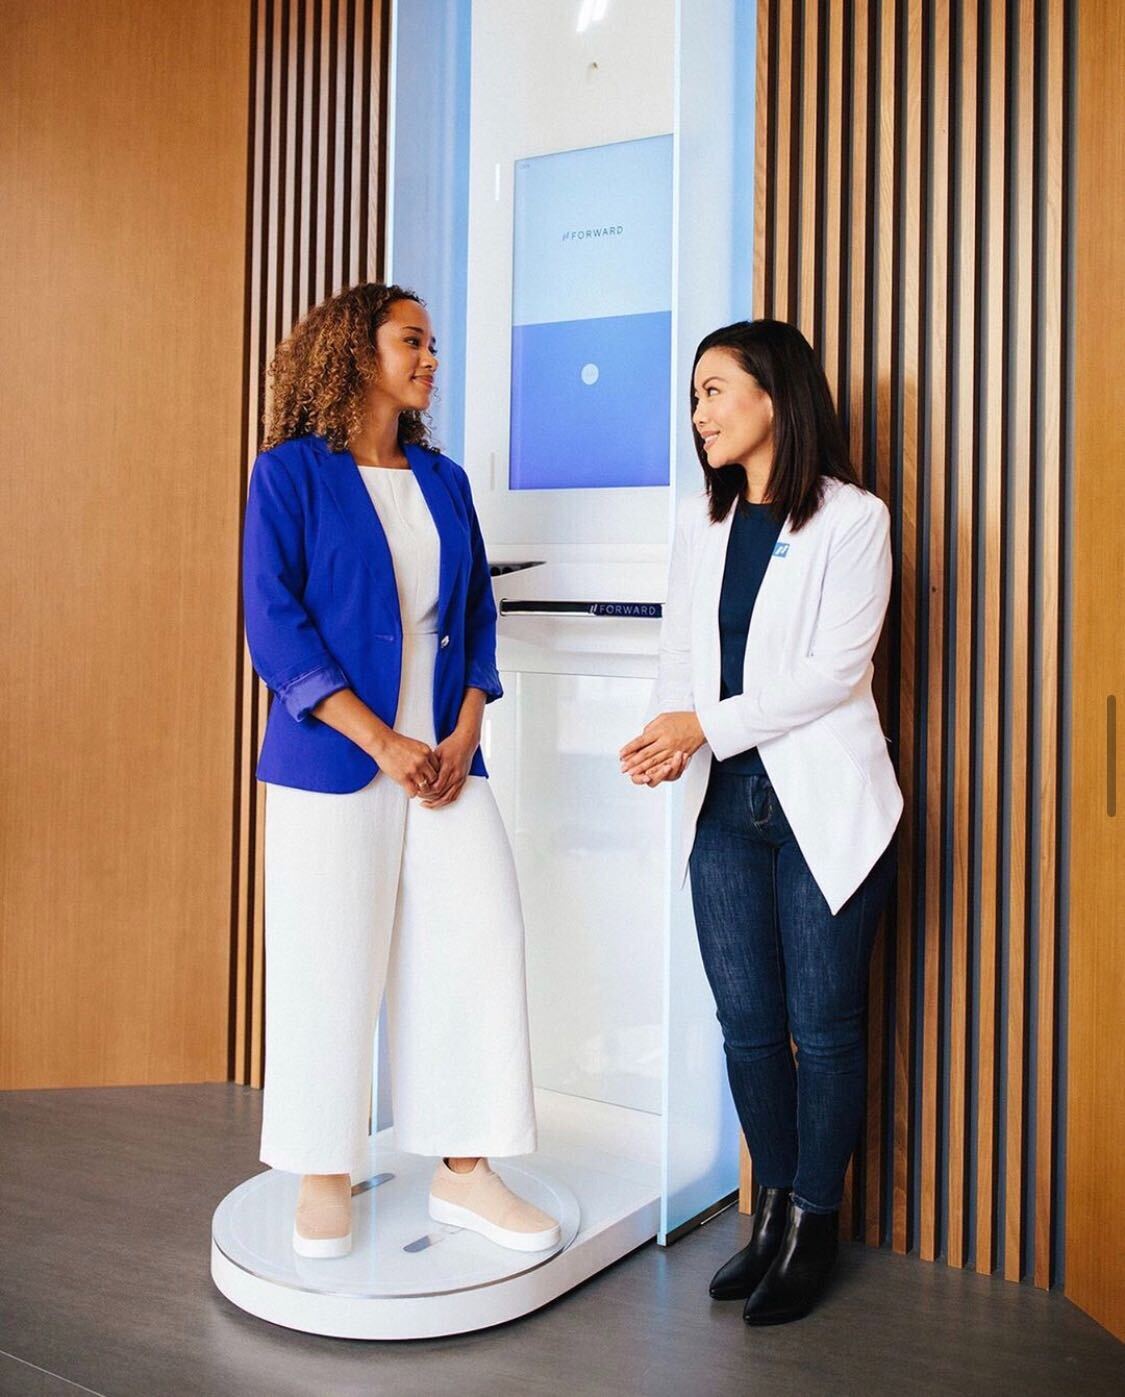 A member uses the bodyscanner with her physician